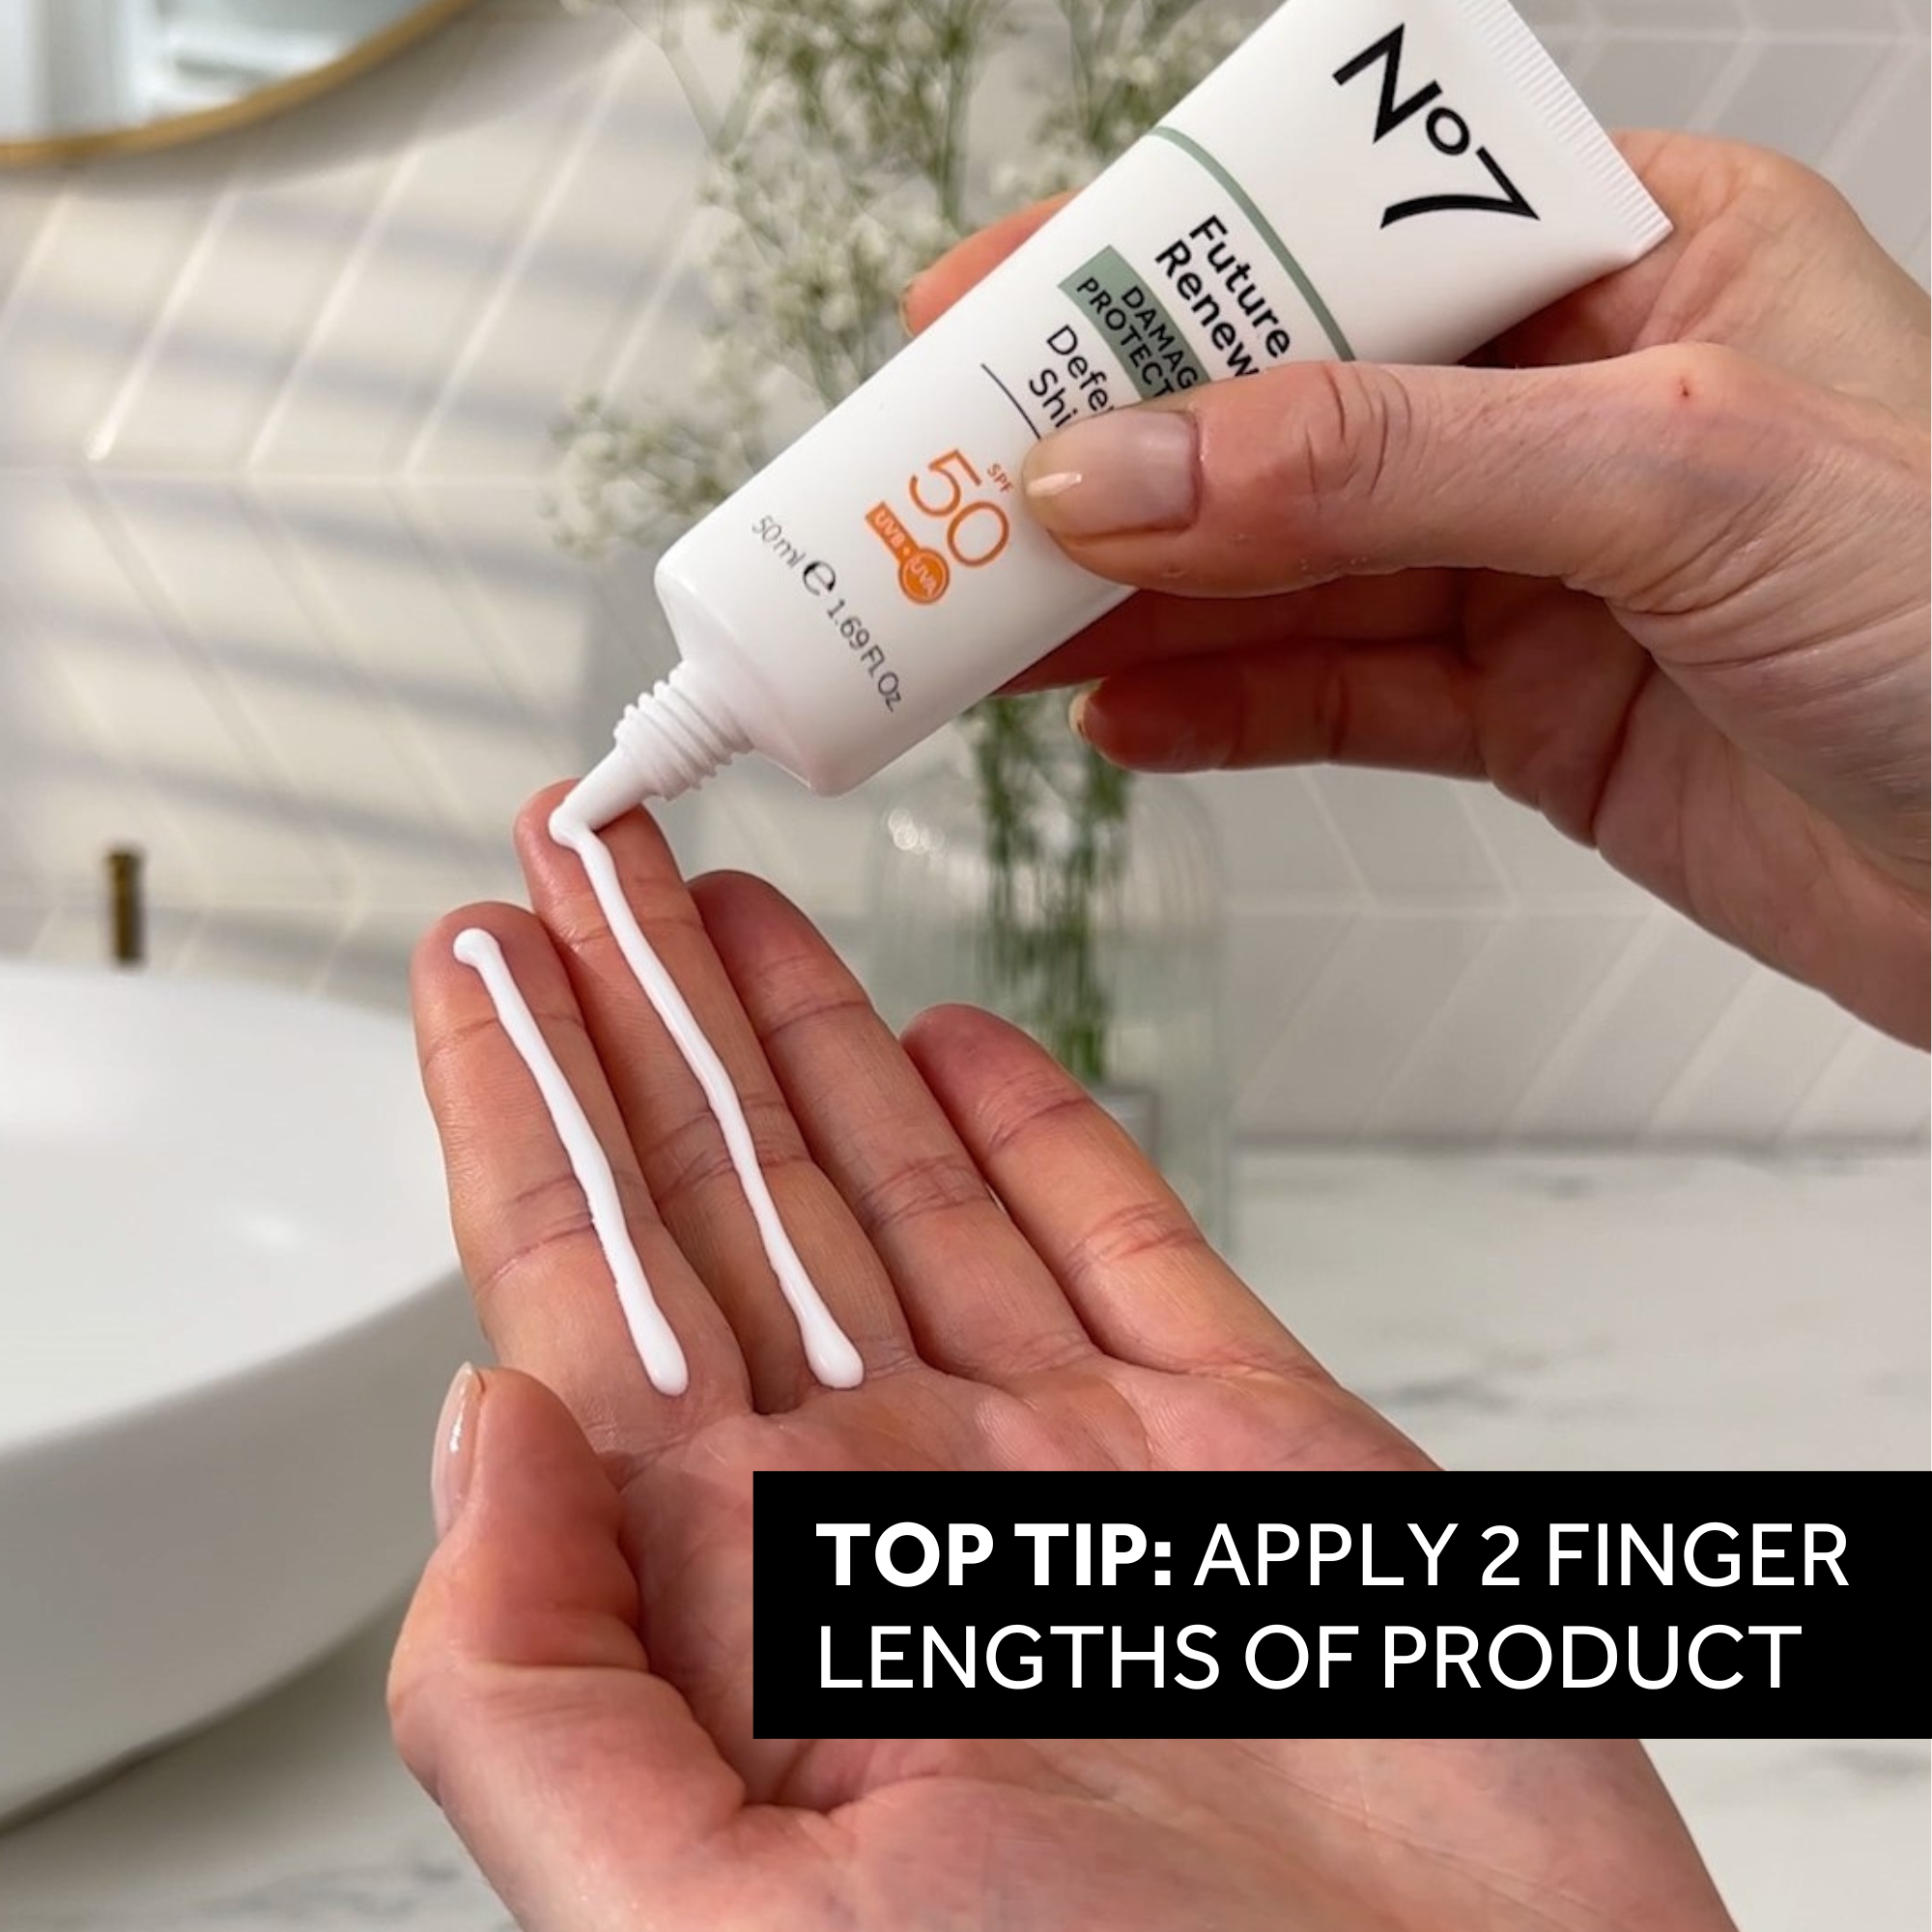 TOP TIP: APPLY 2 FINGER LENGTHS OF PRODUCT